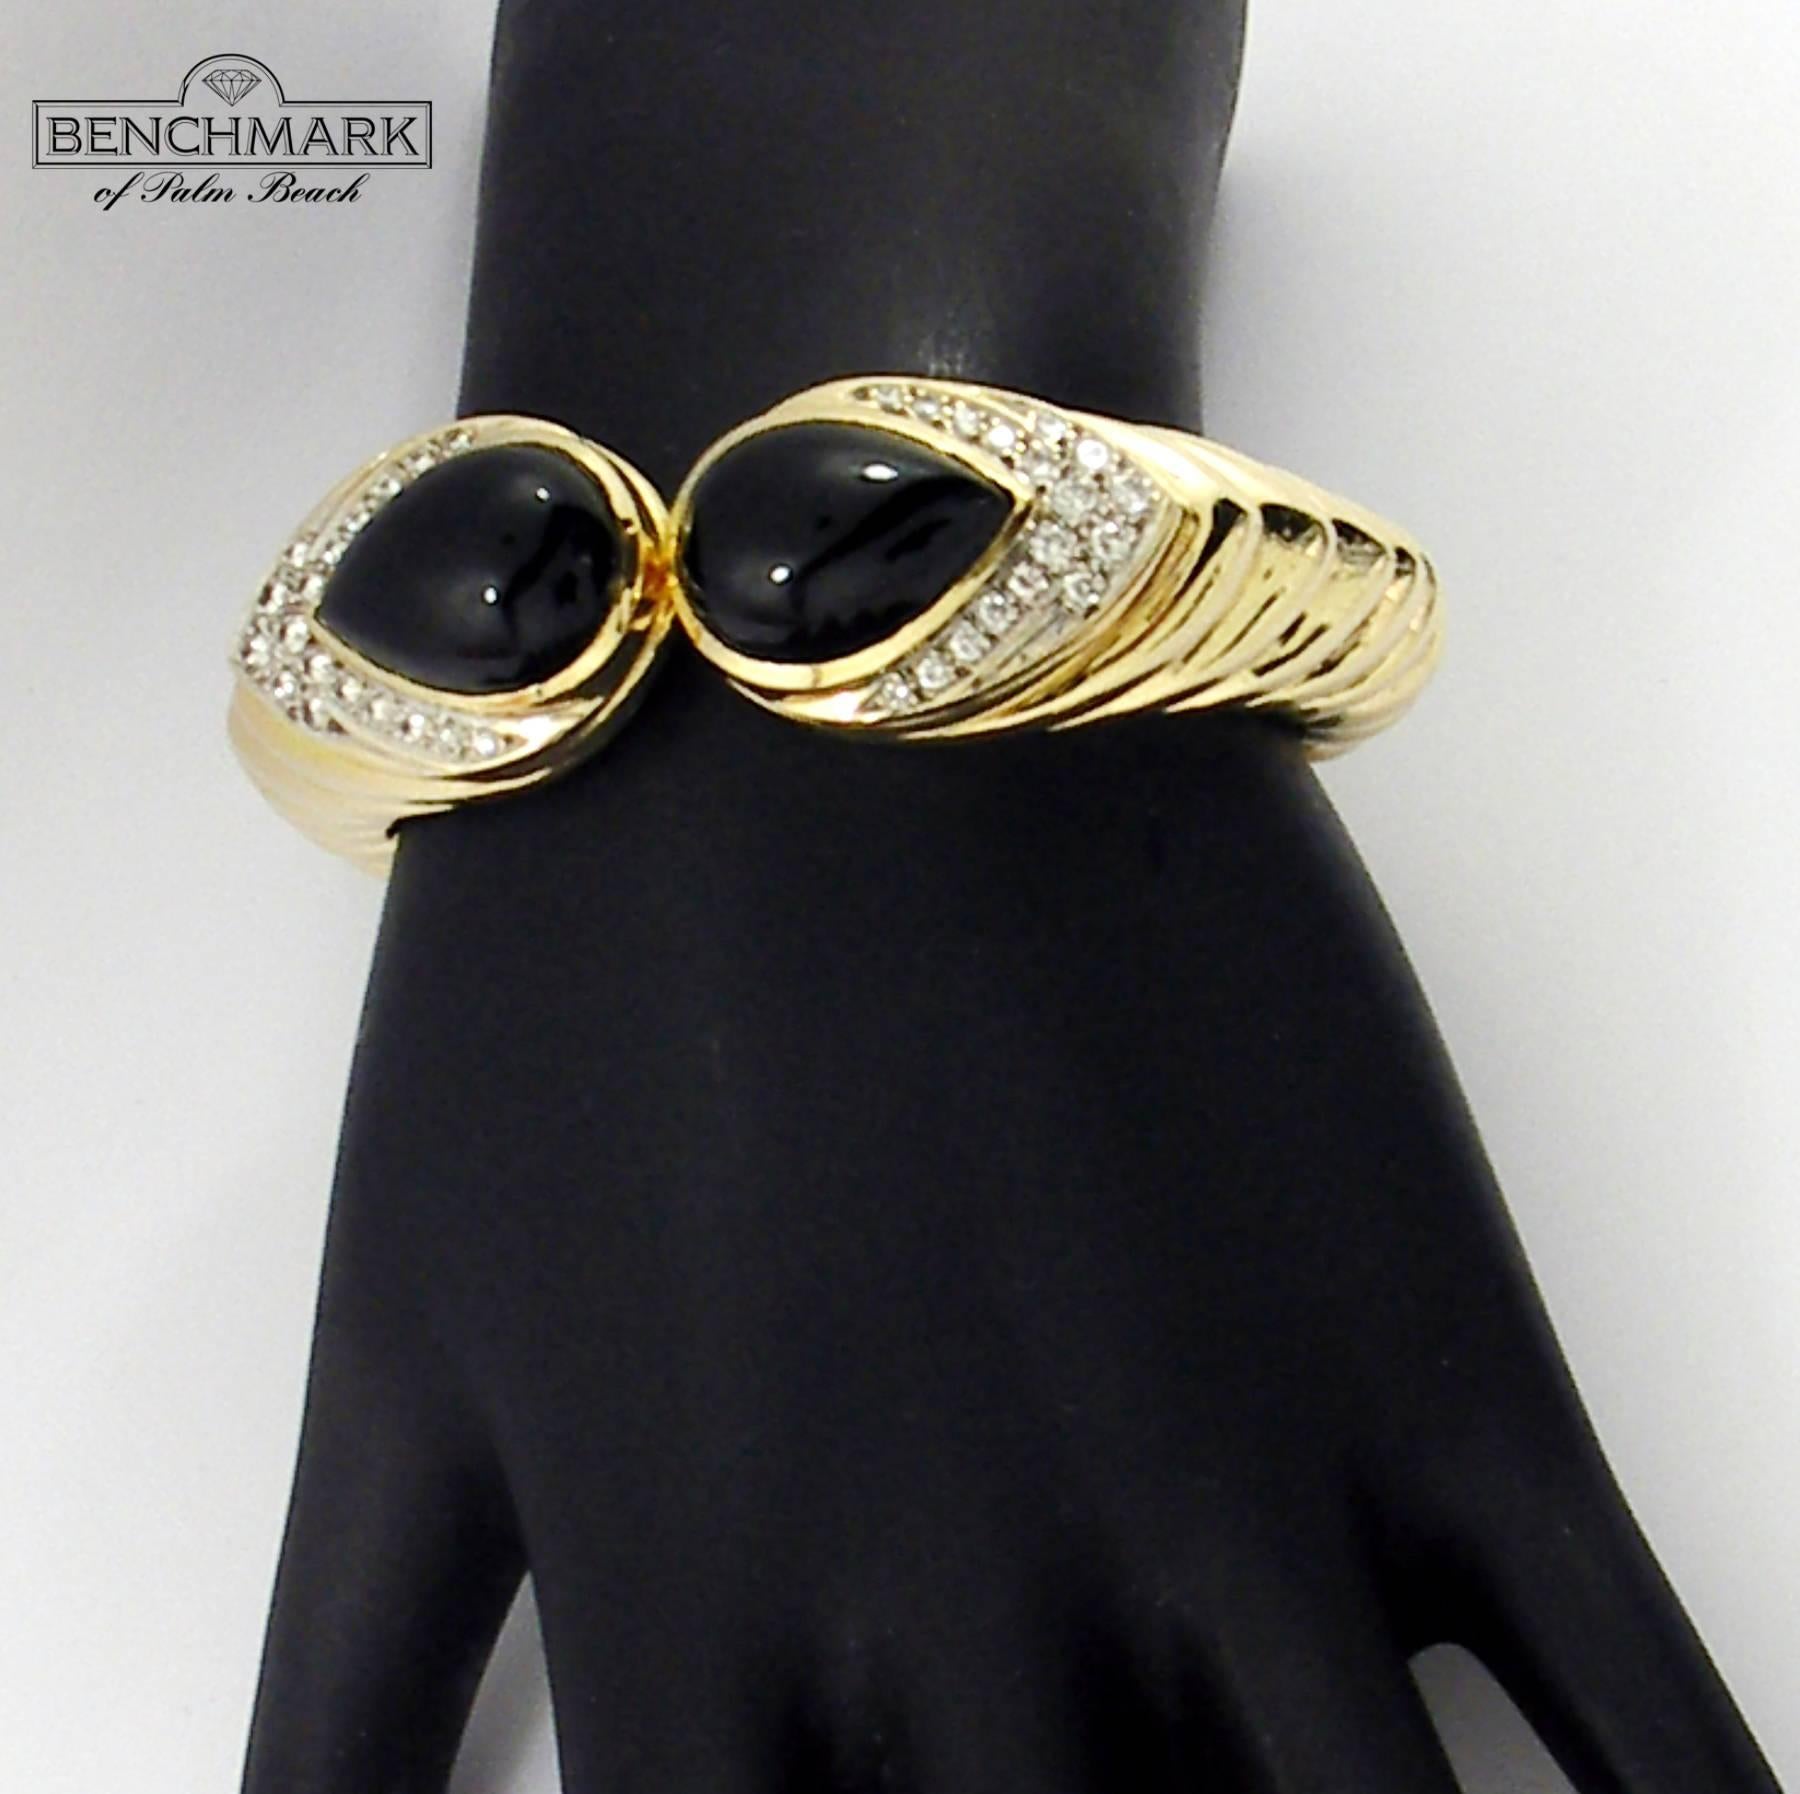 One 14K yellow gold clamper cuff bracelet featuring a tiered, split front design. On either side of the opening are Pear shaped onyx cabochons, accented by a total of 36 round brilliant cut diamonds. Diamonds weigh 1.35 ct total approximate weight